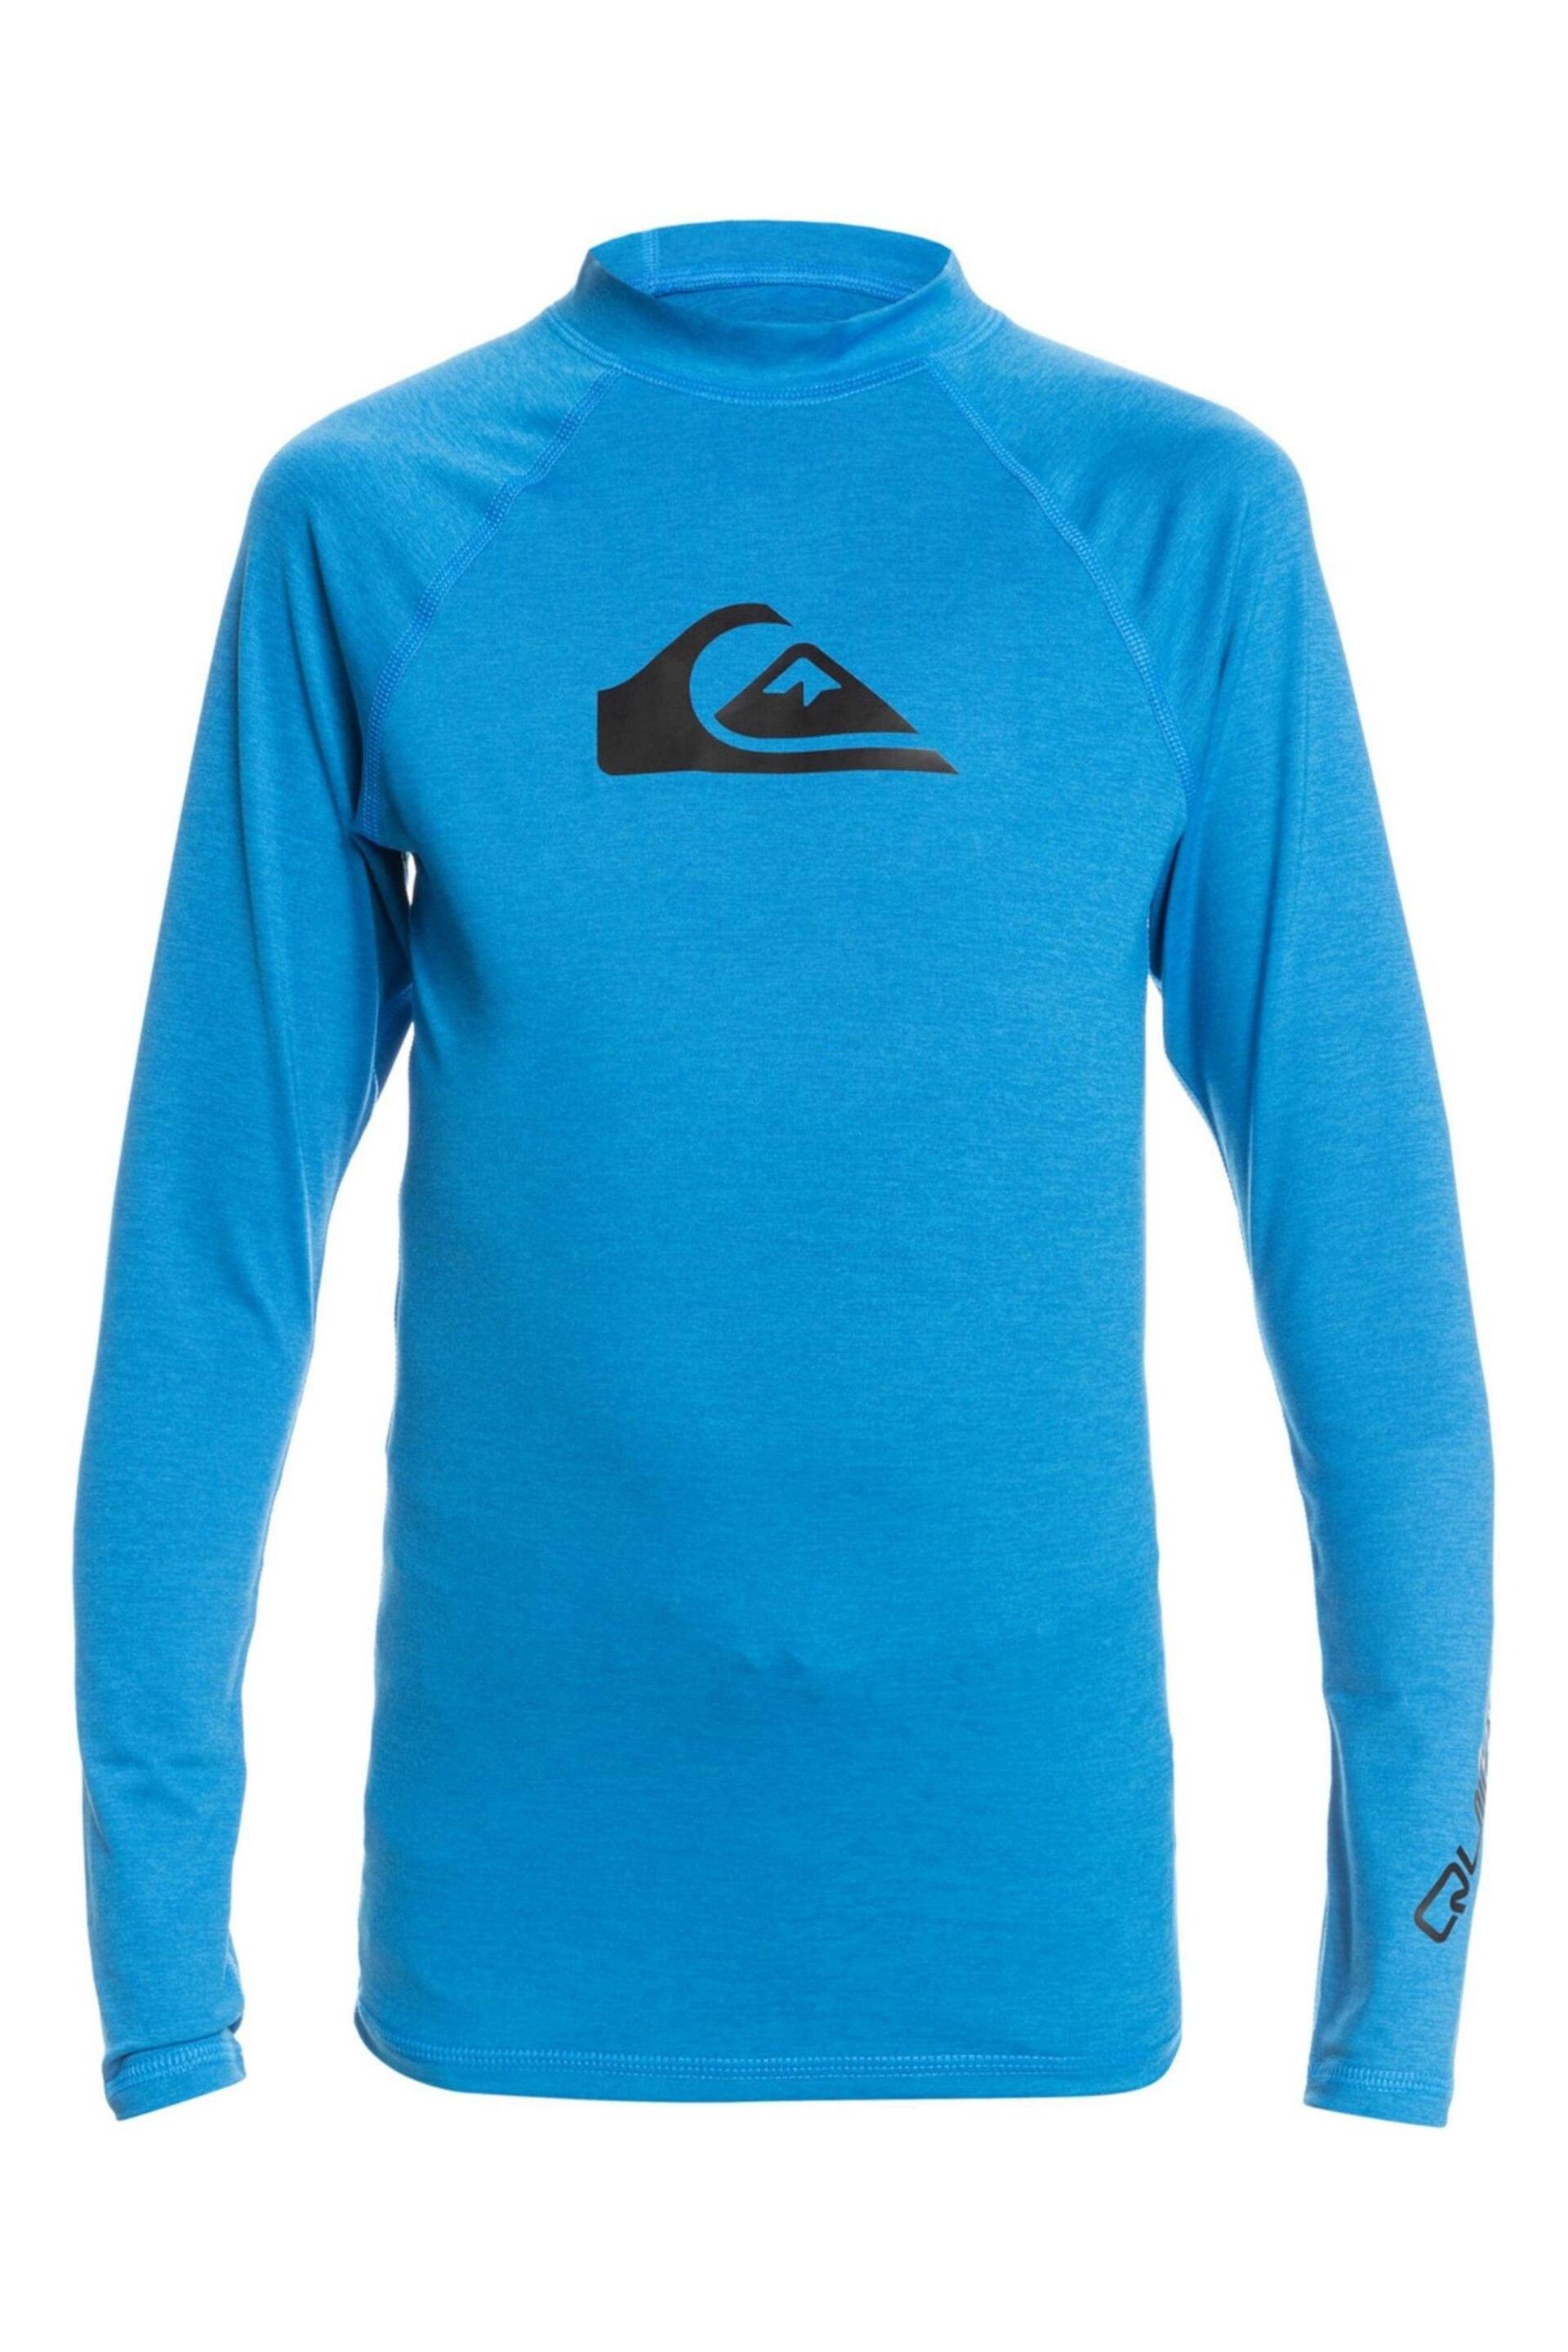 Quiksilver All Time Long Sleeves Rash Vest - Image 4 of 4